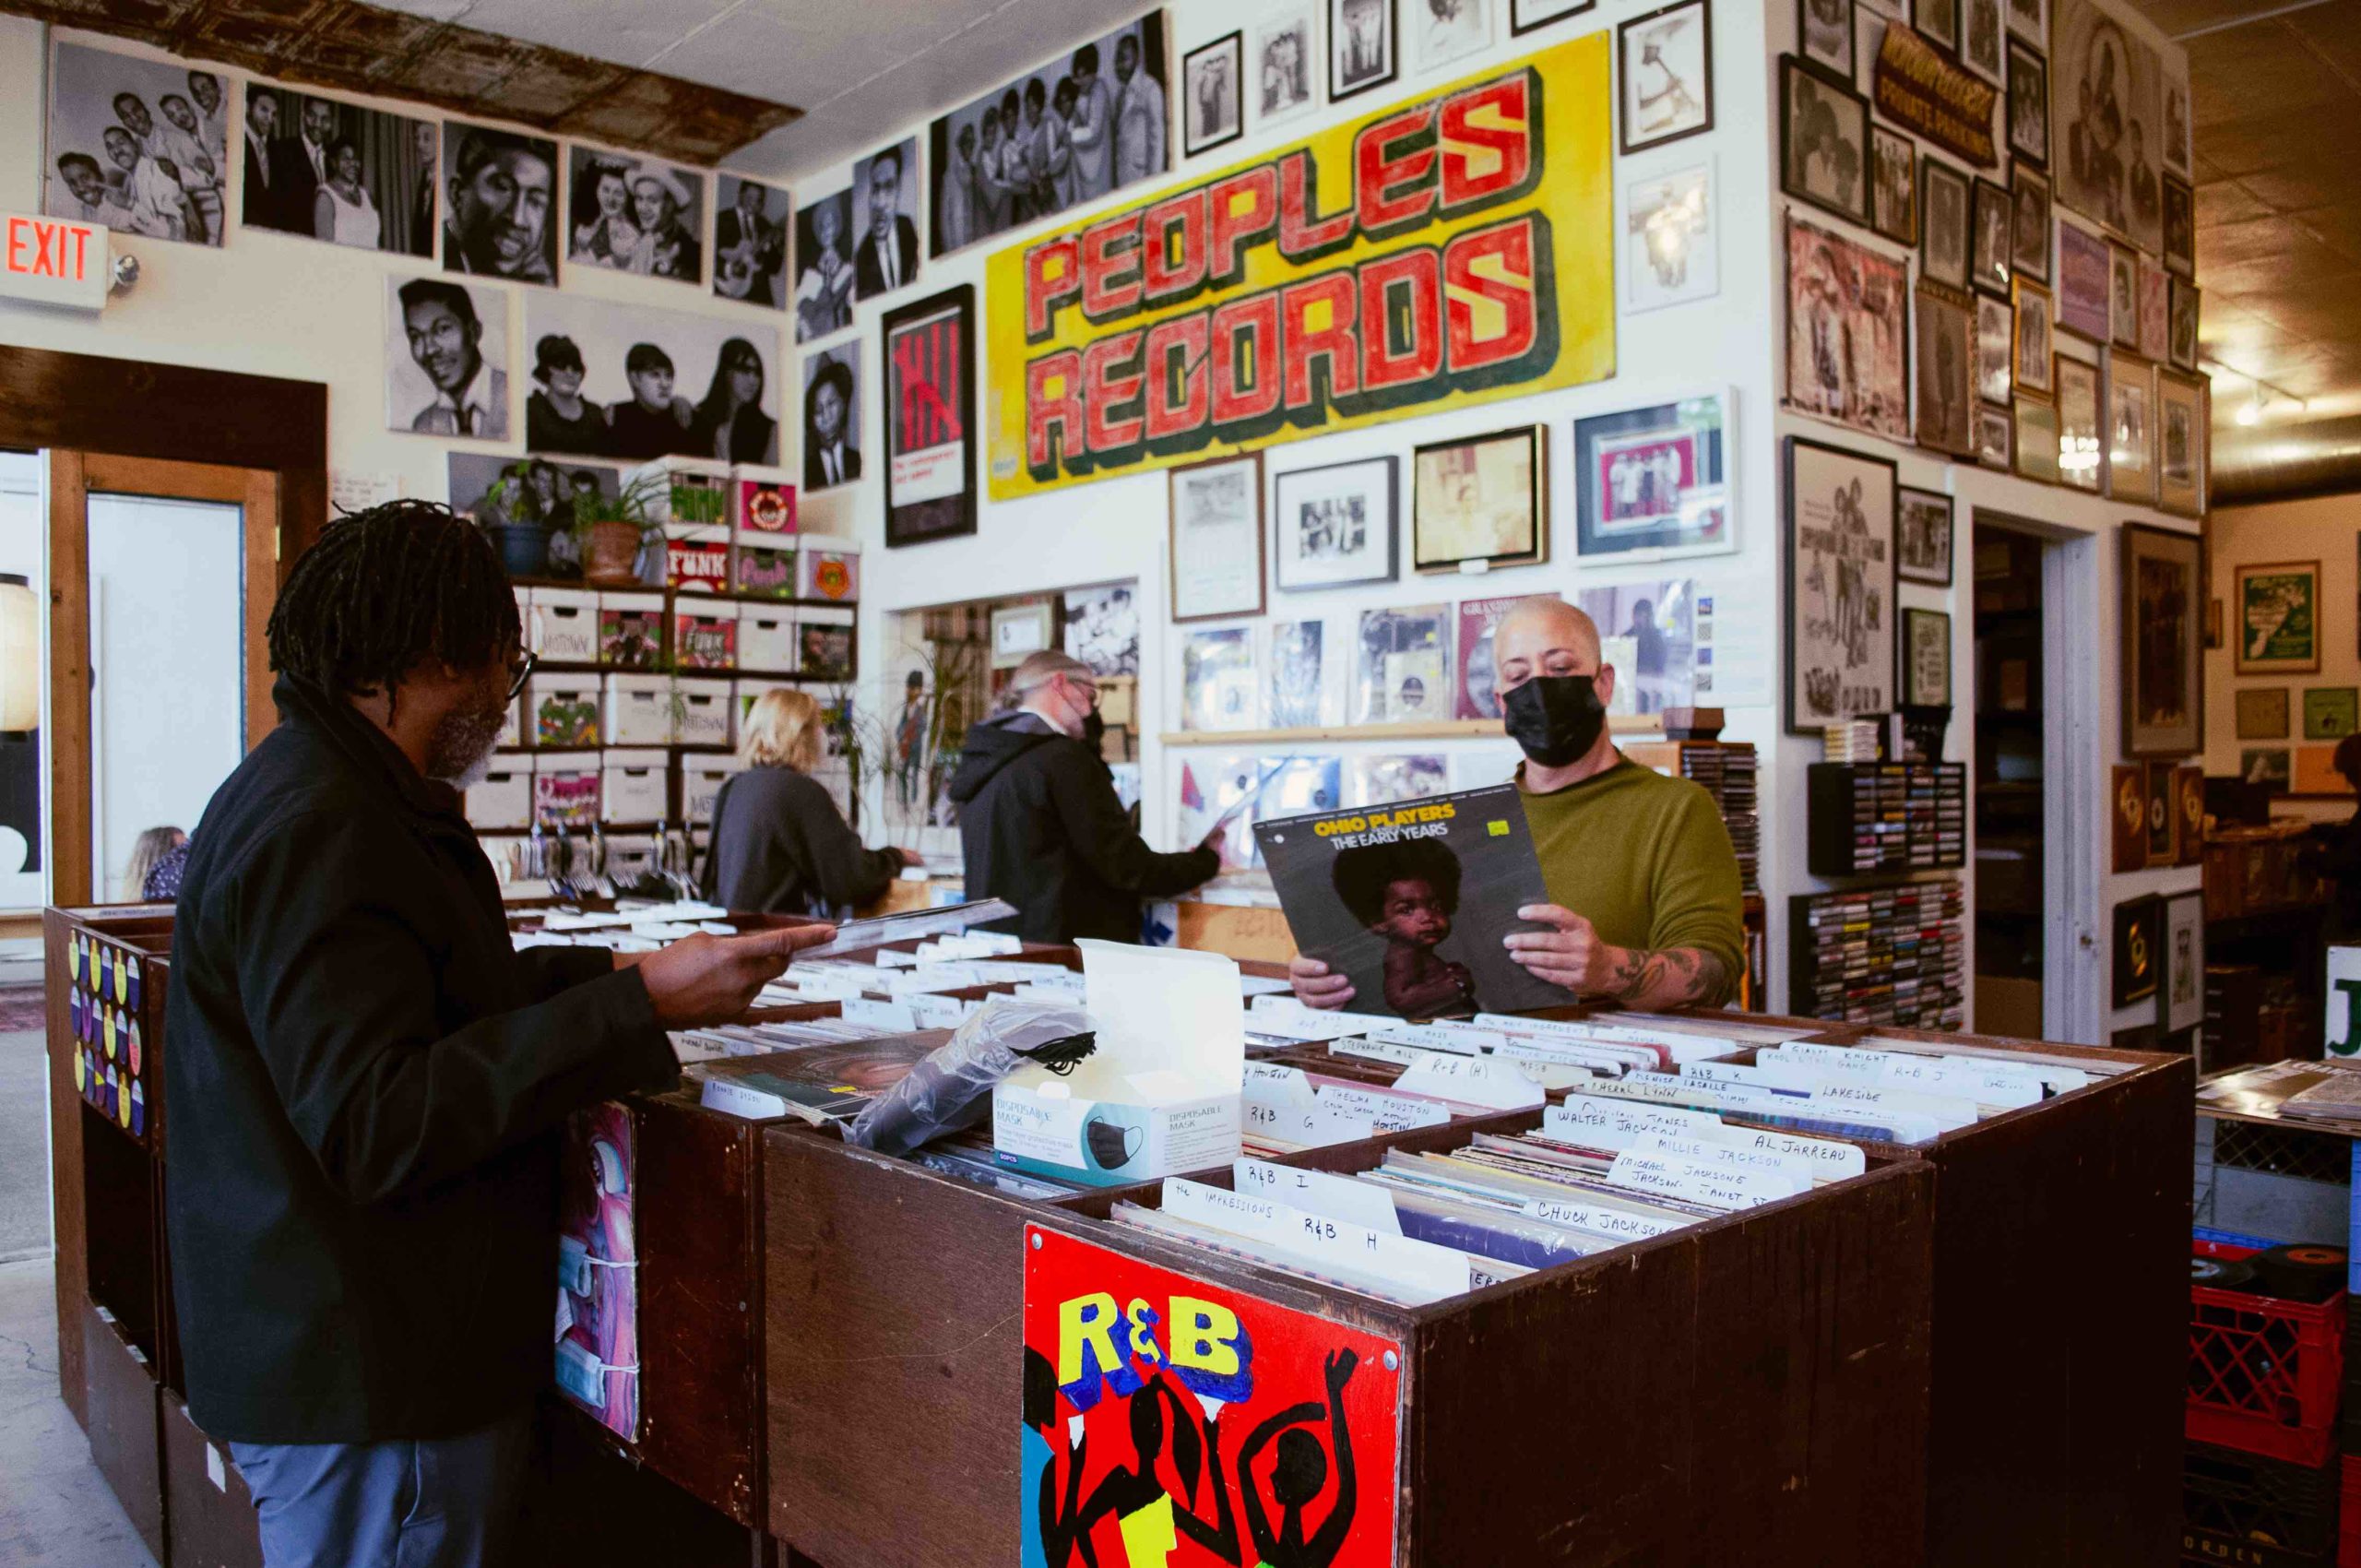 Peoples Record Store